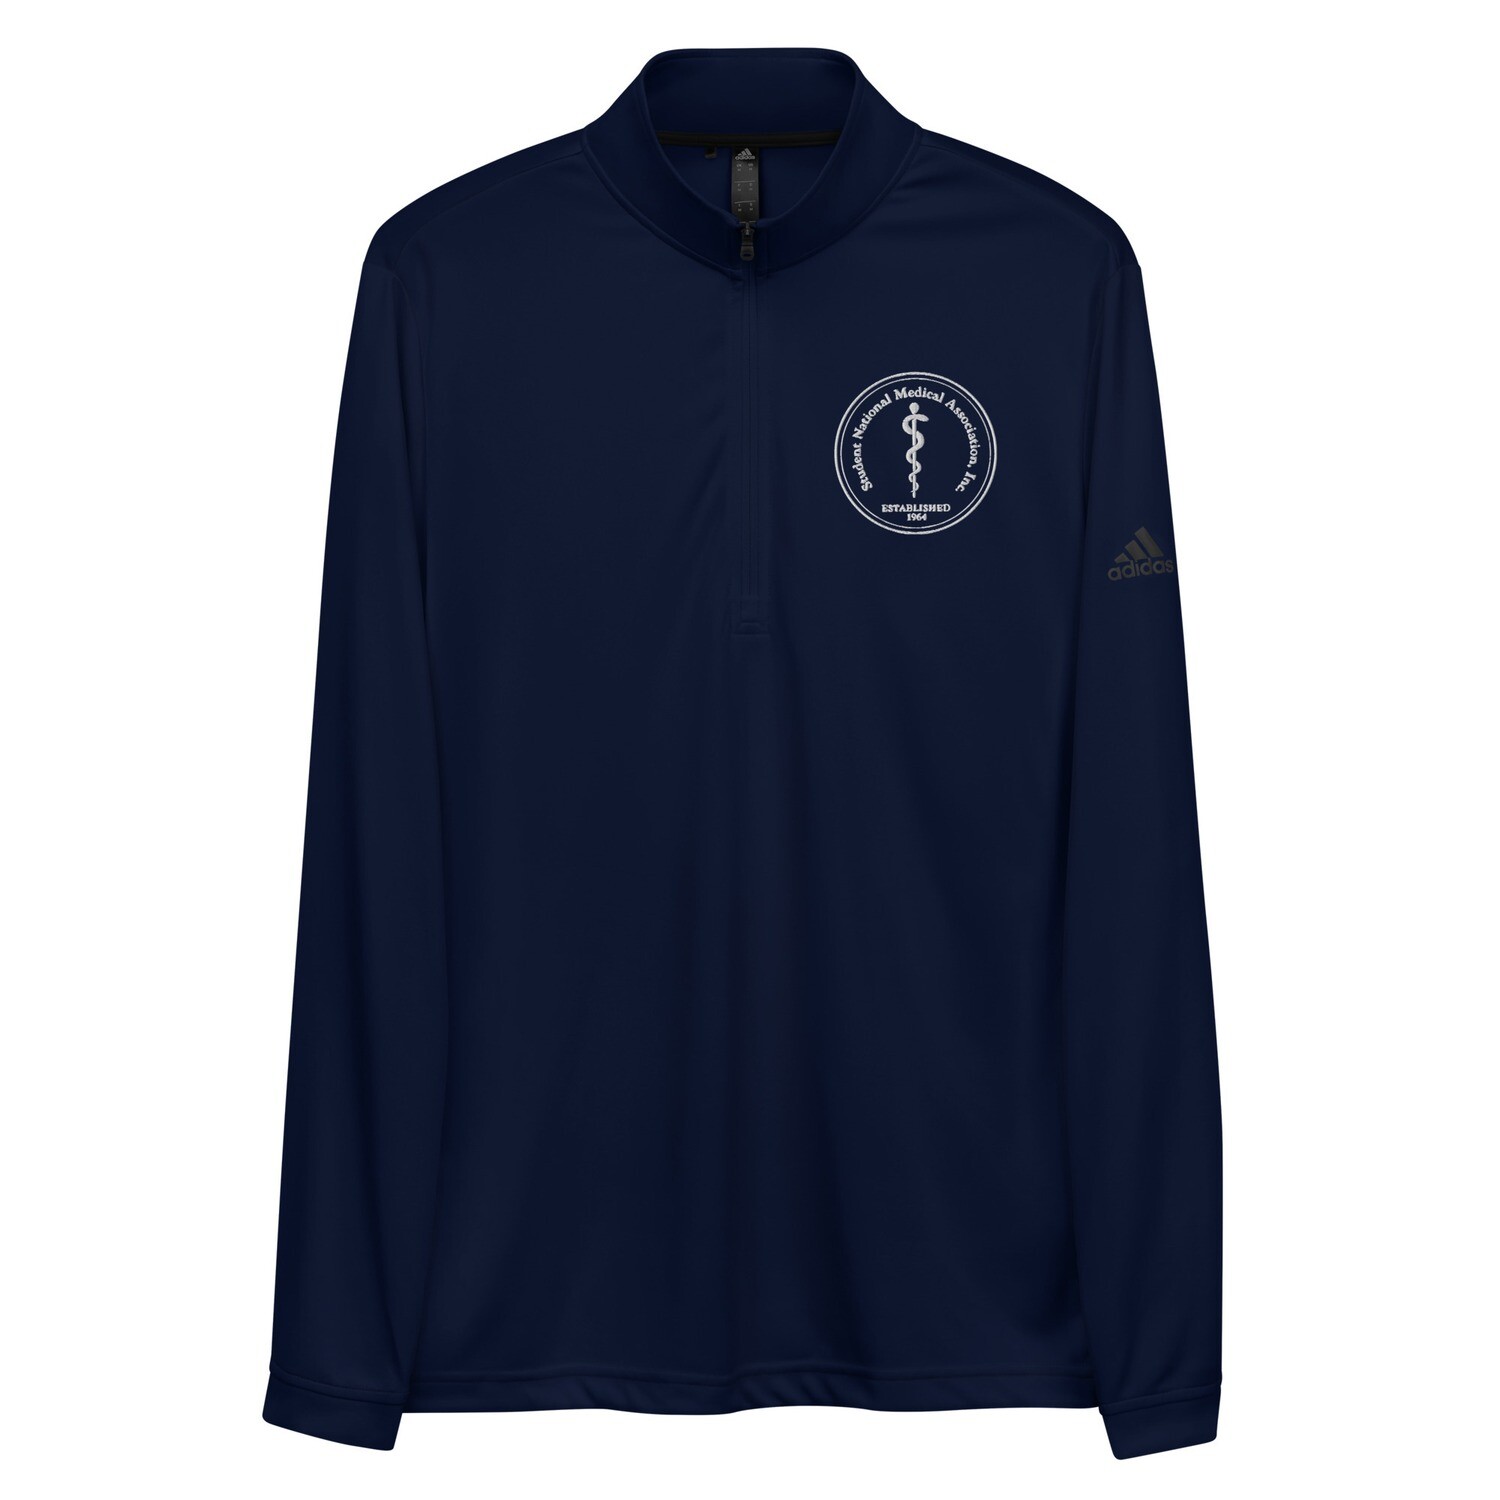 STAFF ONLY - Quarter zip pullover